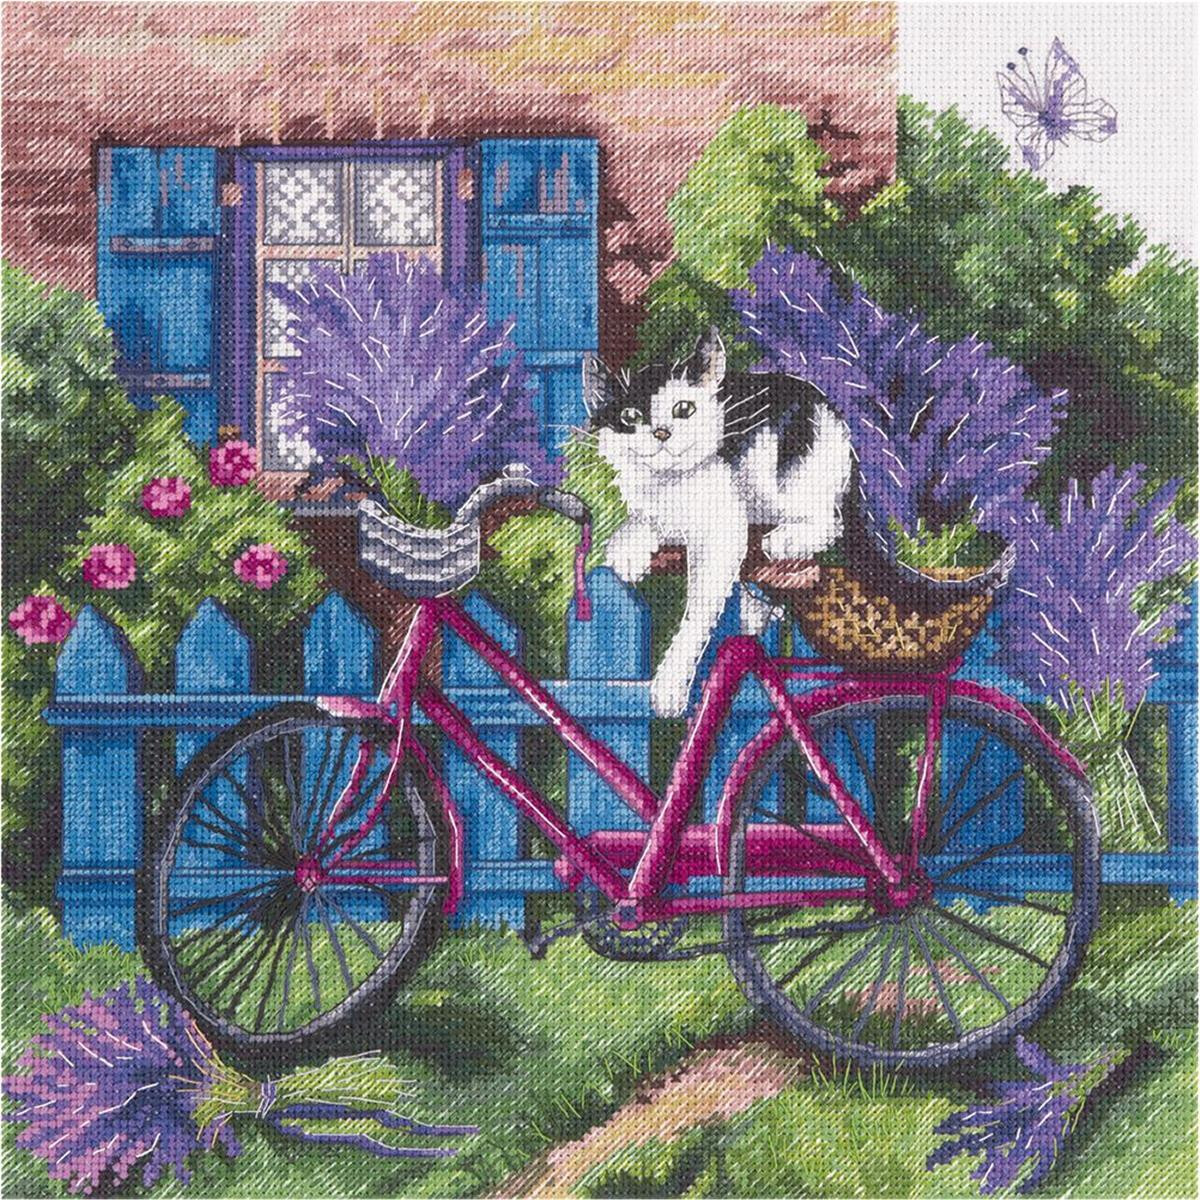 Panna counted cross stitch kit  "Midday in...